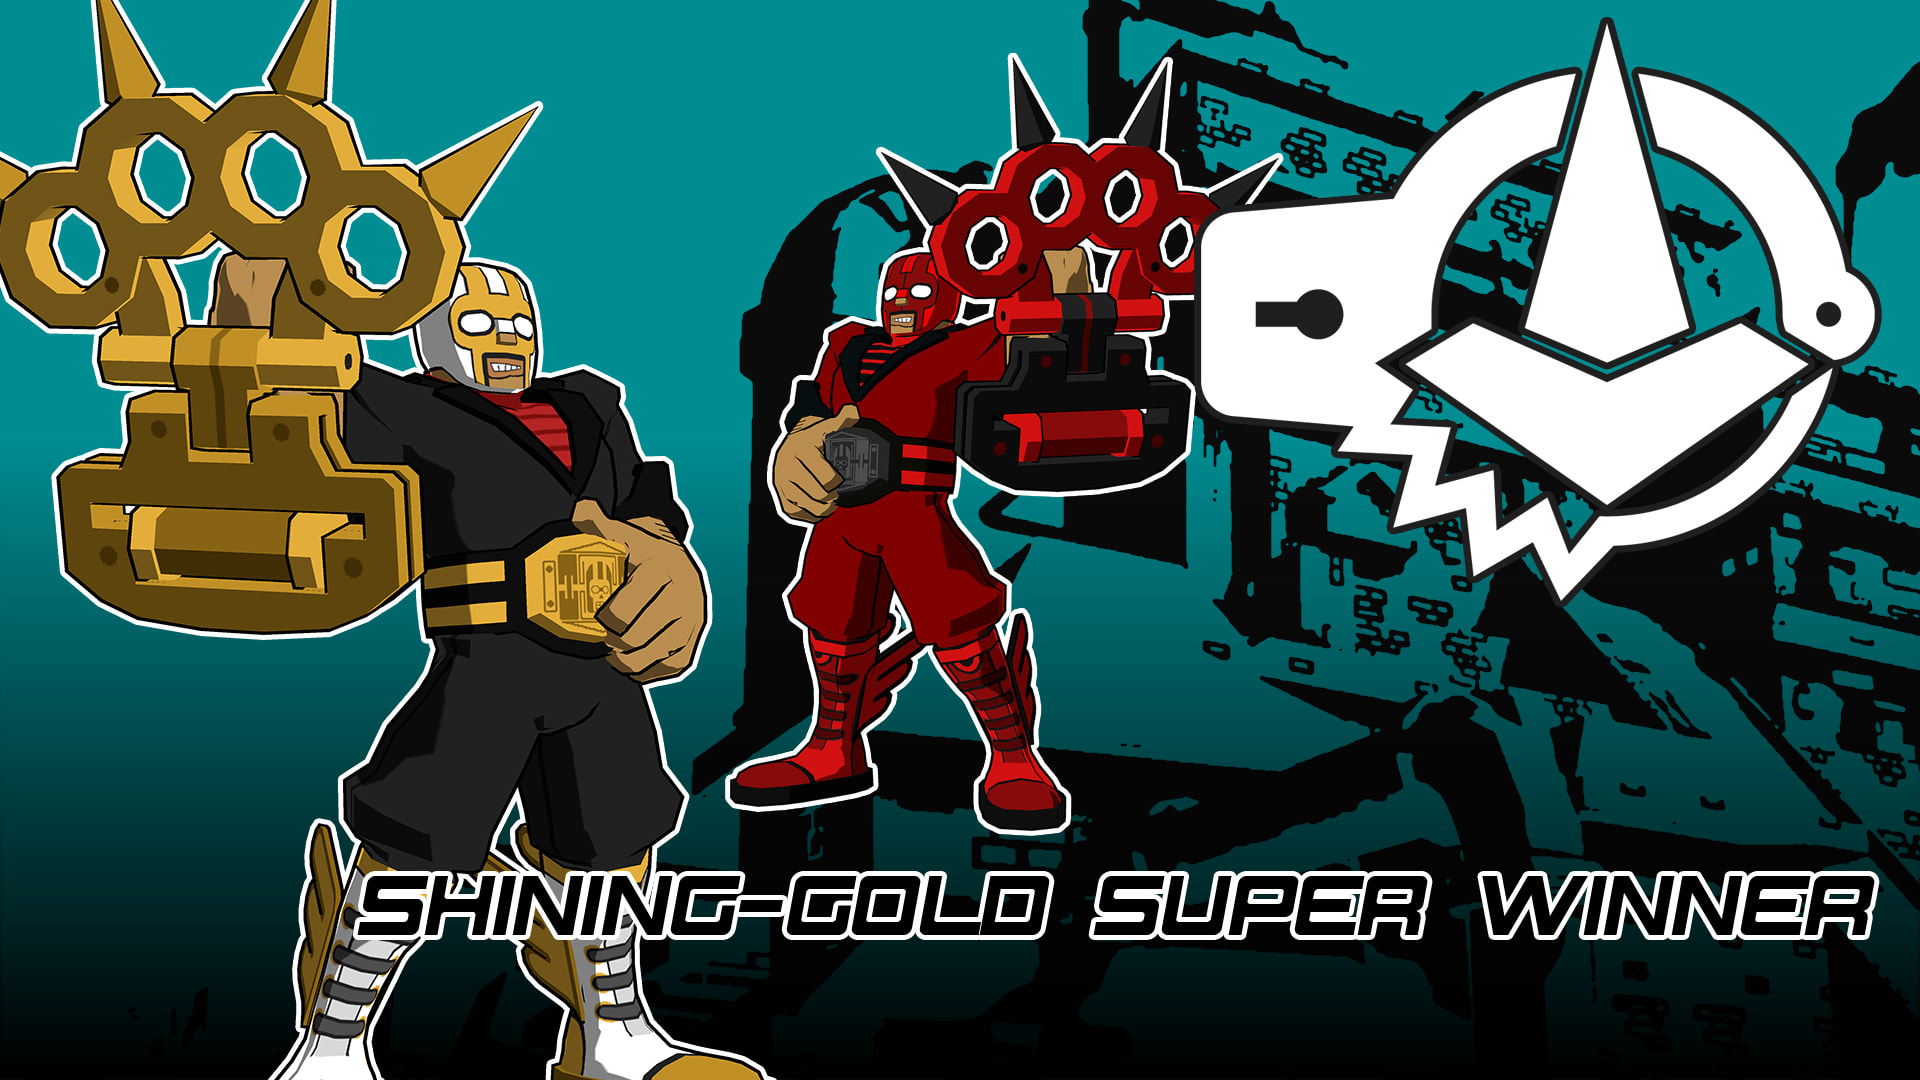 Shining-Gold Super Winner outfit for Nitro